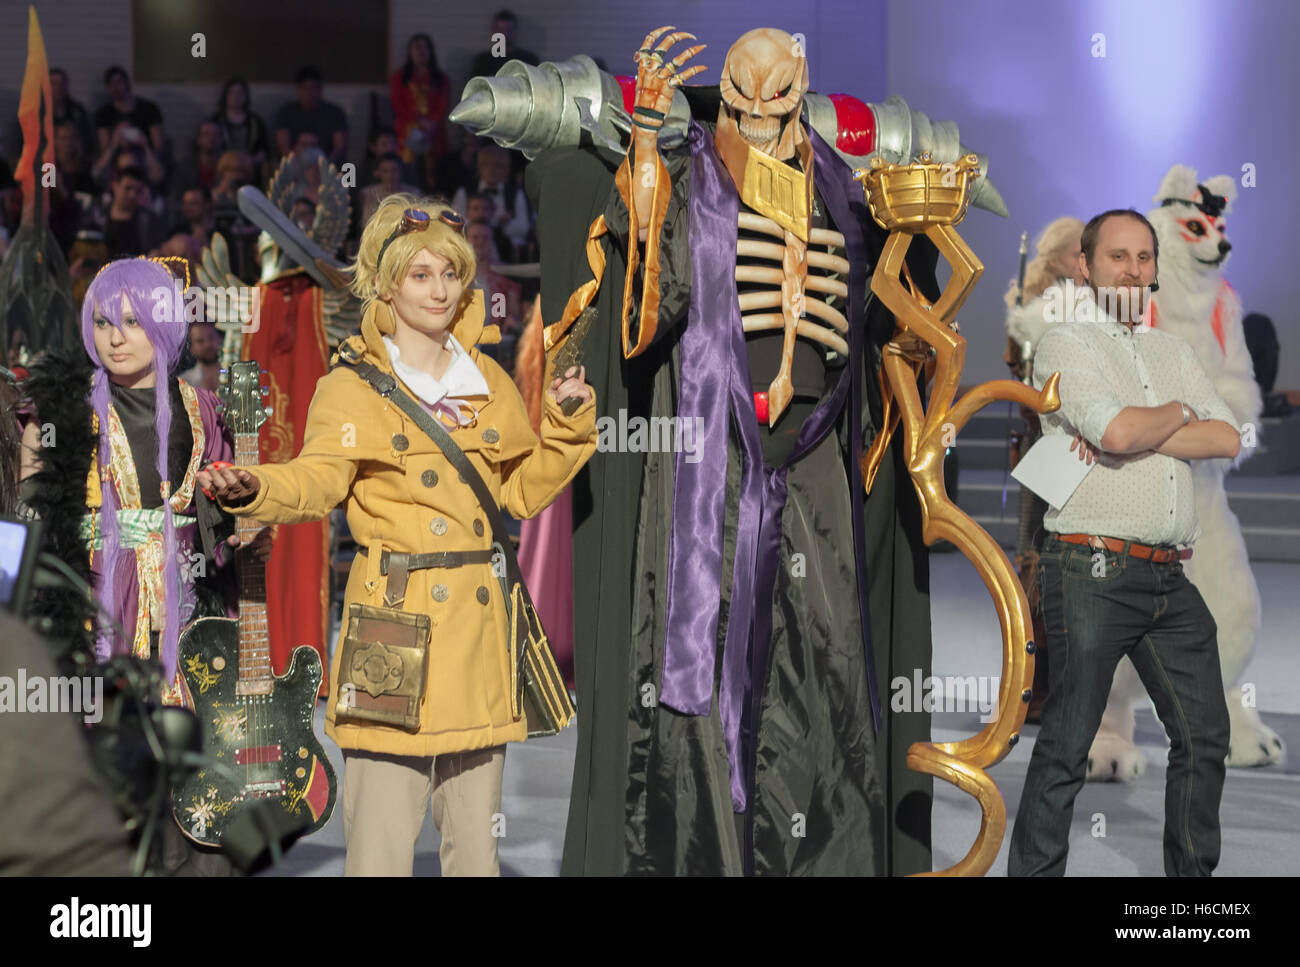 BRNO, CZECH REPUBLIC - APRIL 30, 2016: Cosplayer dressed as character Momonga from Overlord anime series poses Stock Photo